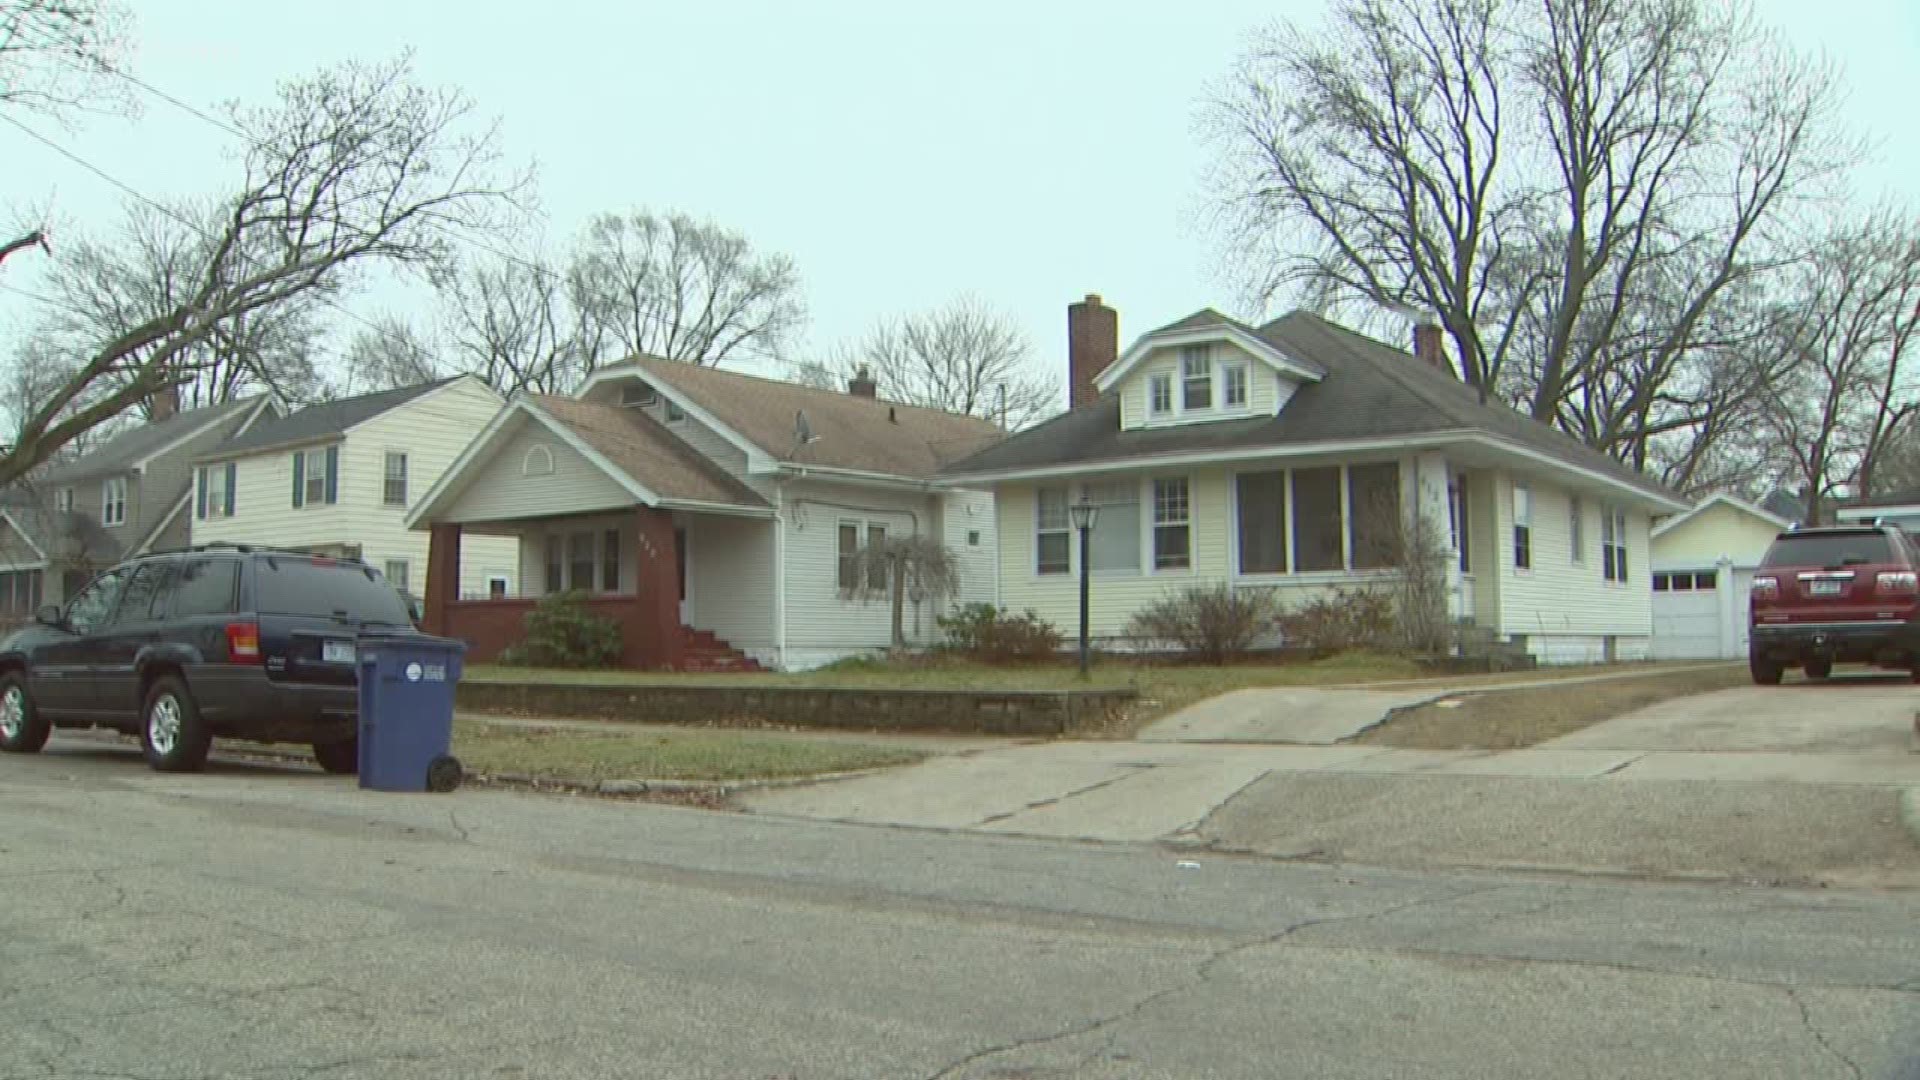 Historic Sears homes remain in Grand Rapids